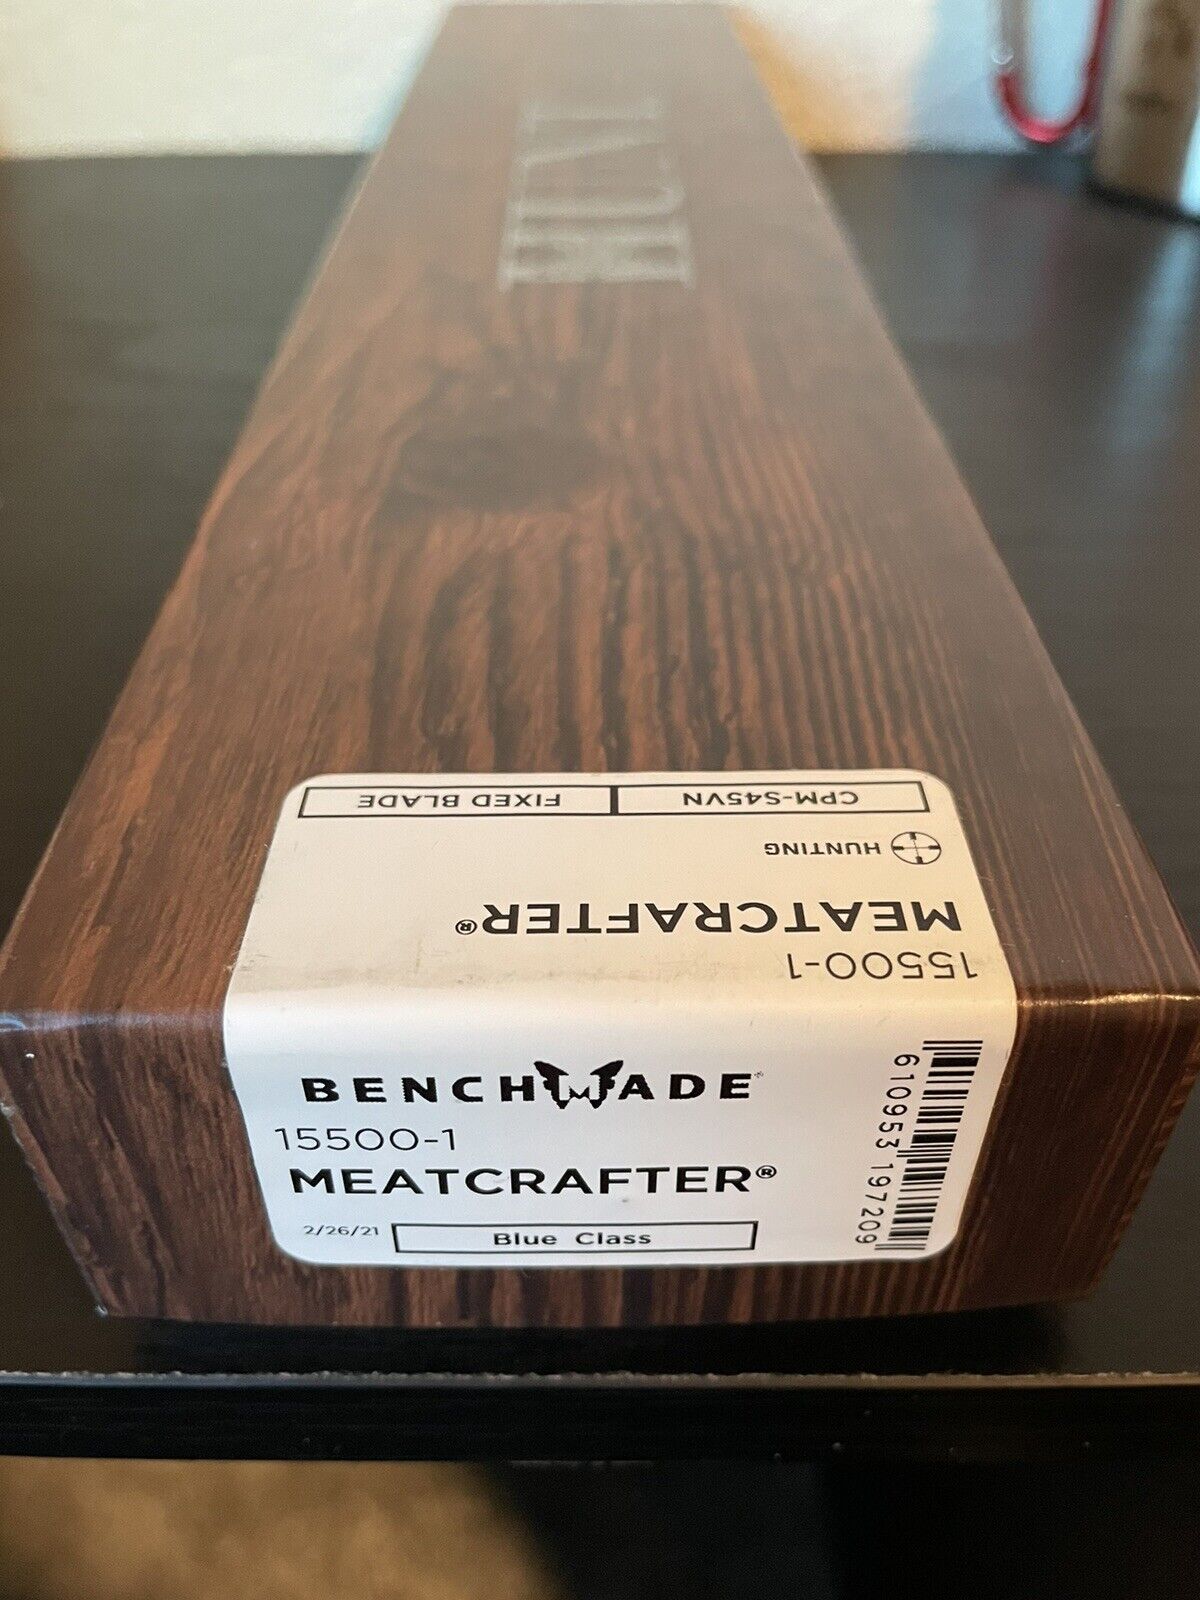 15500-1 Benchmade Meatcrafter Schells Factory Sealed